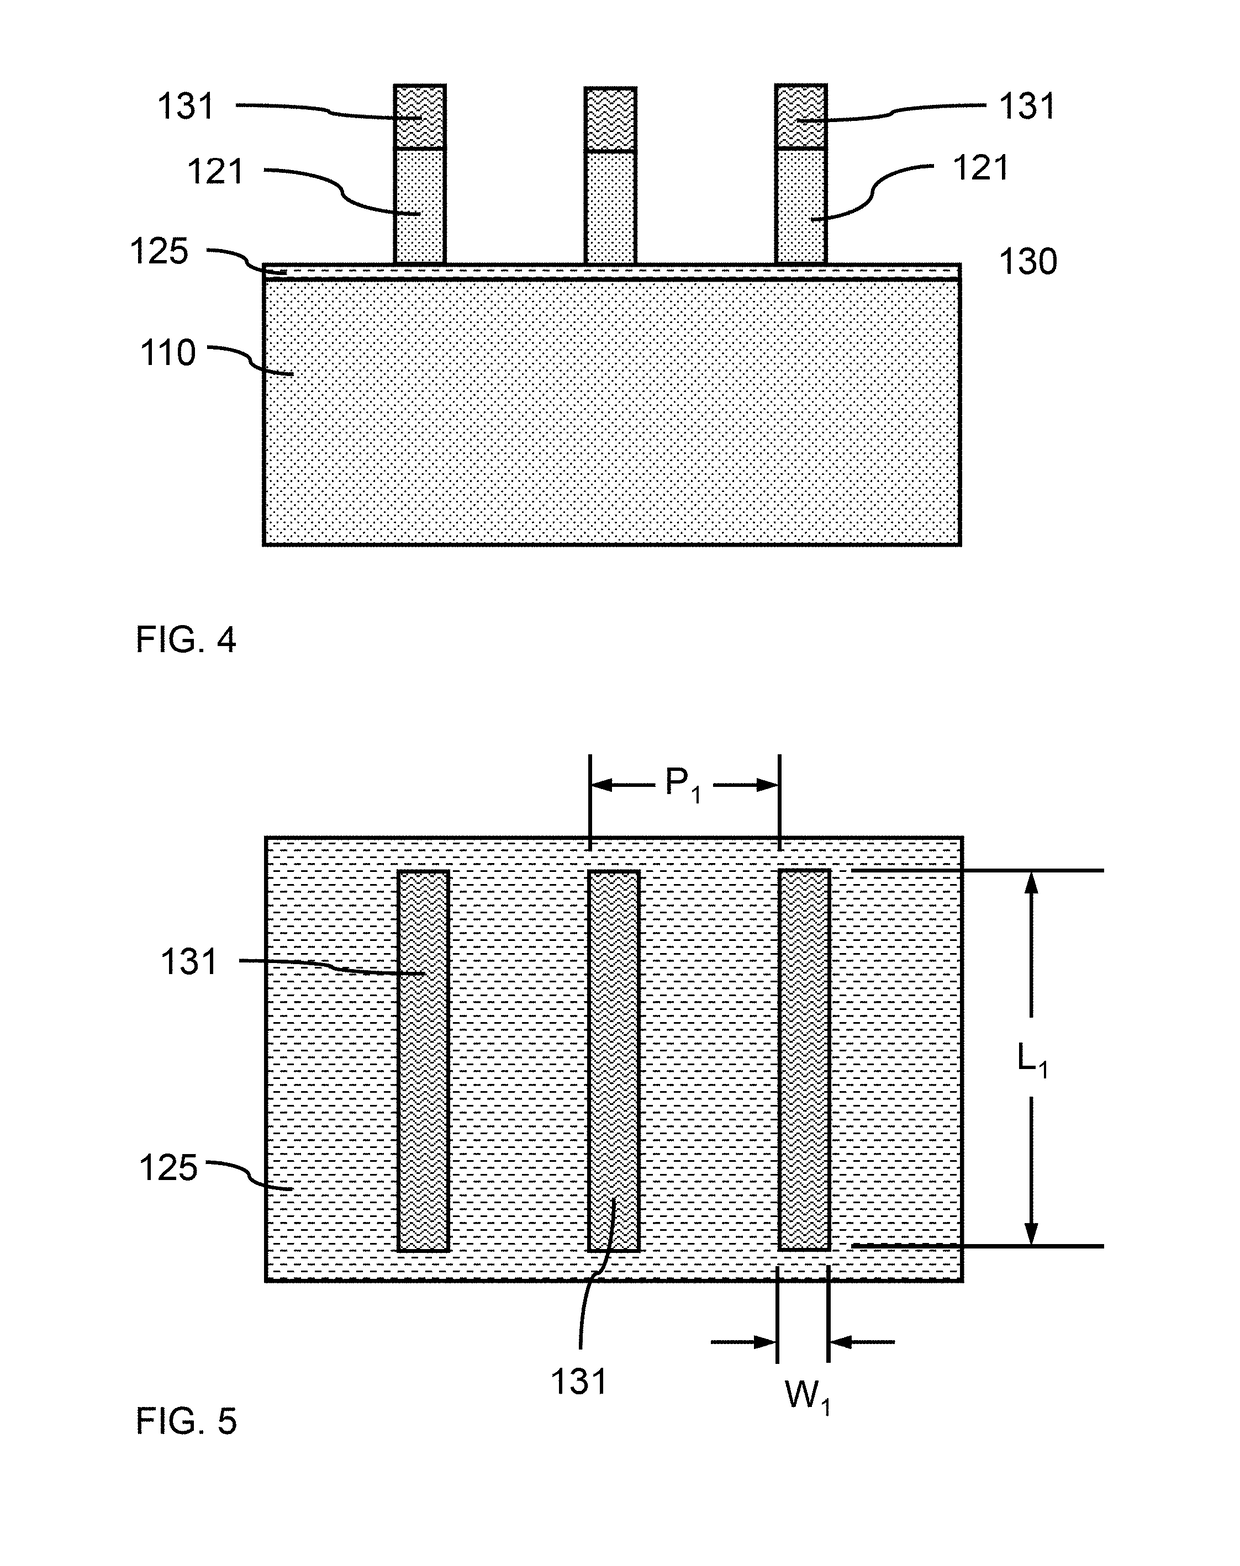 Fabrication of a vertical fin field effect transistor (vertical finfet) with a self-aligned gate and fin edges